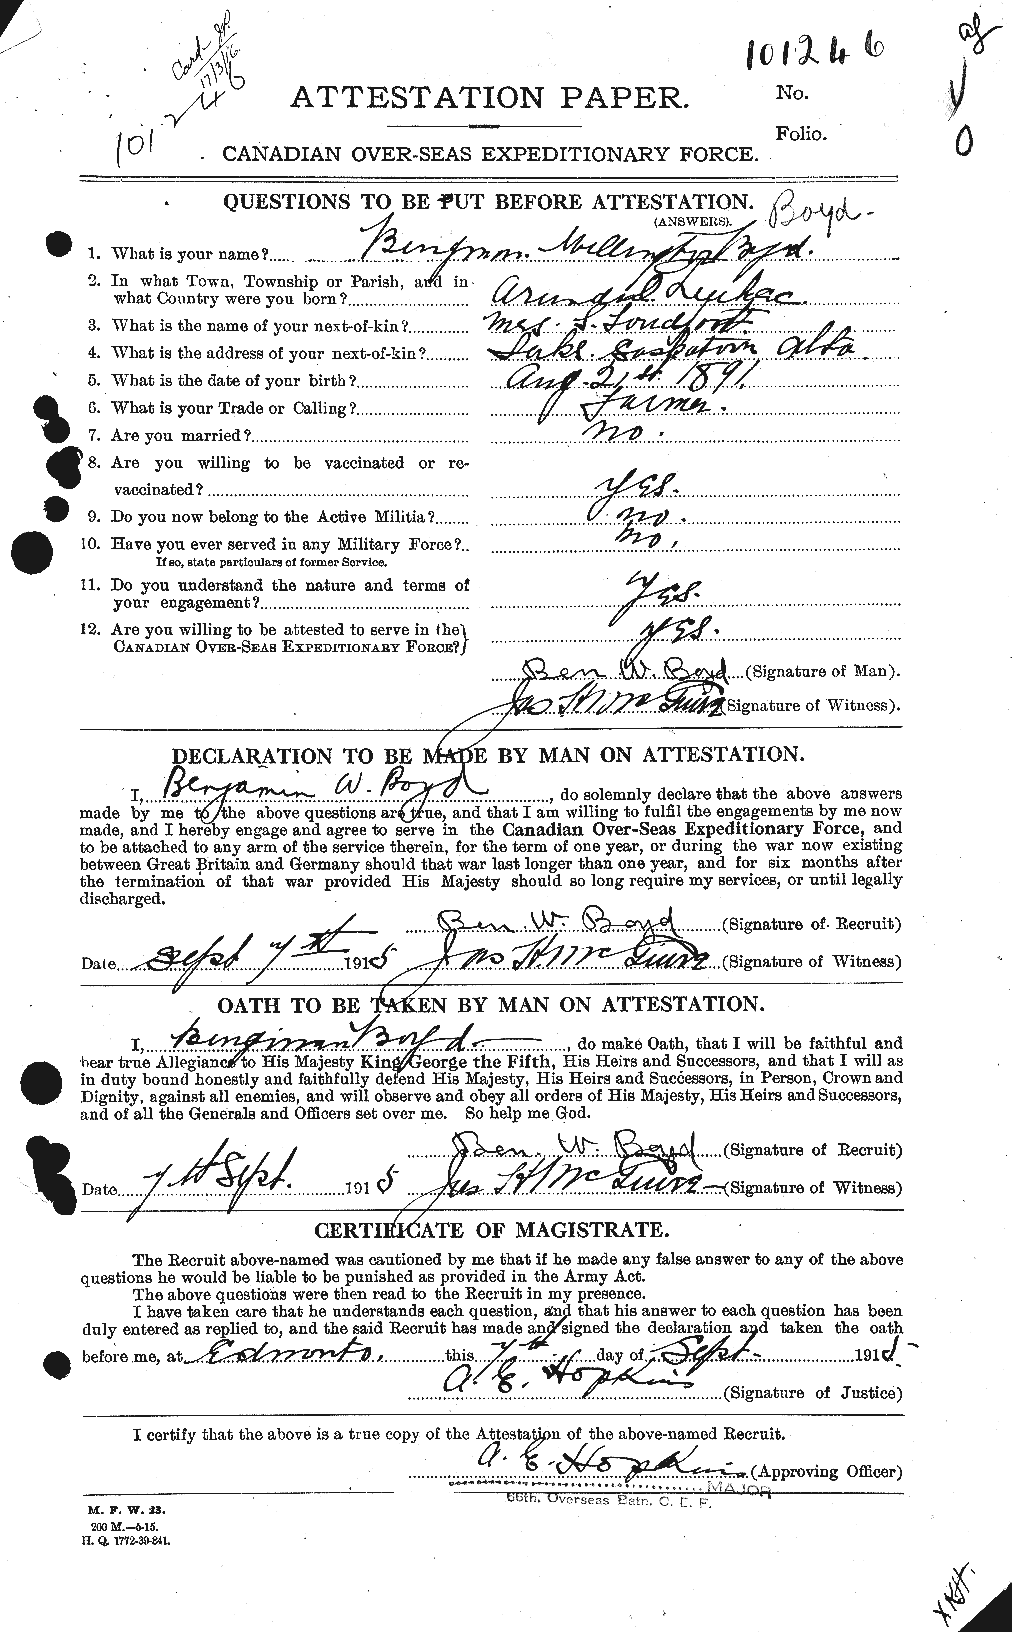 Personnel Records of the First World War - CEF 256905a